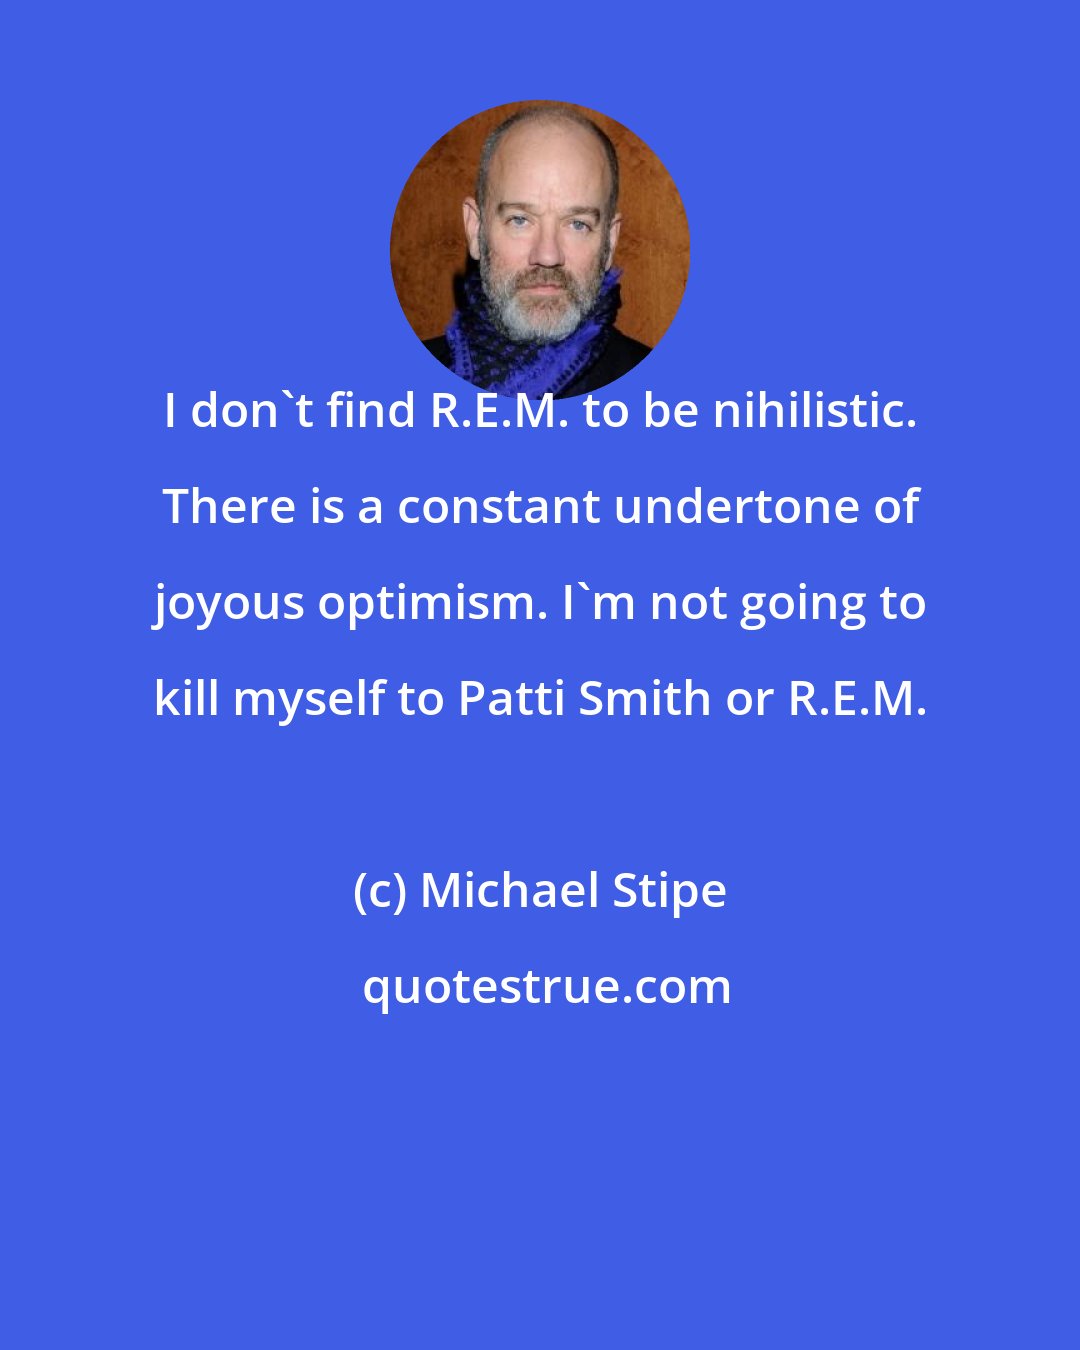 Michael Stipe: I don't find R.E.M. to be nihilistic. There is a constant undertone of joyous optimism. I'm not going to kill myself to Patti Smith or R.E.M.